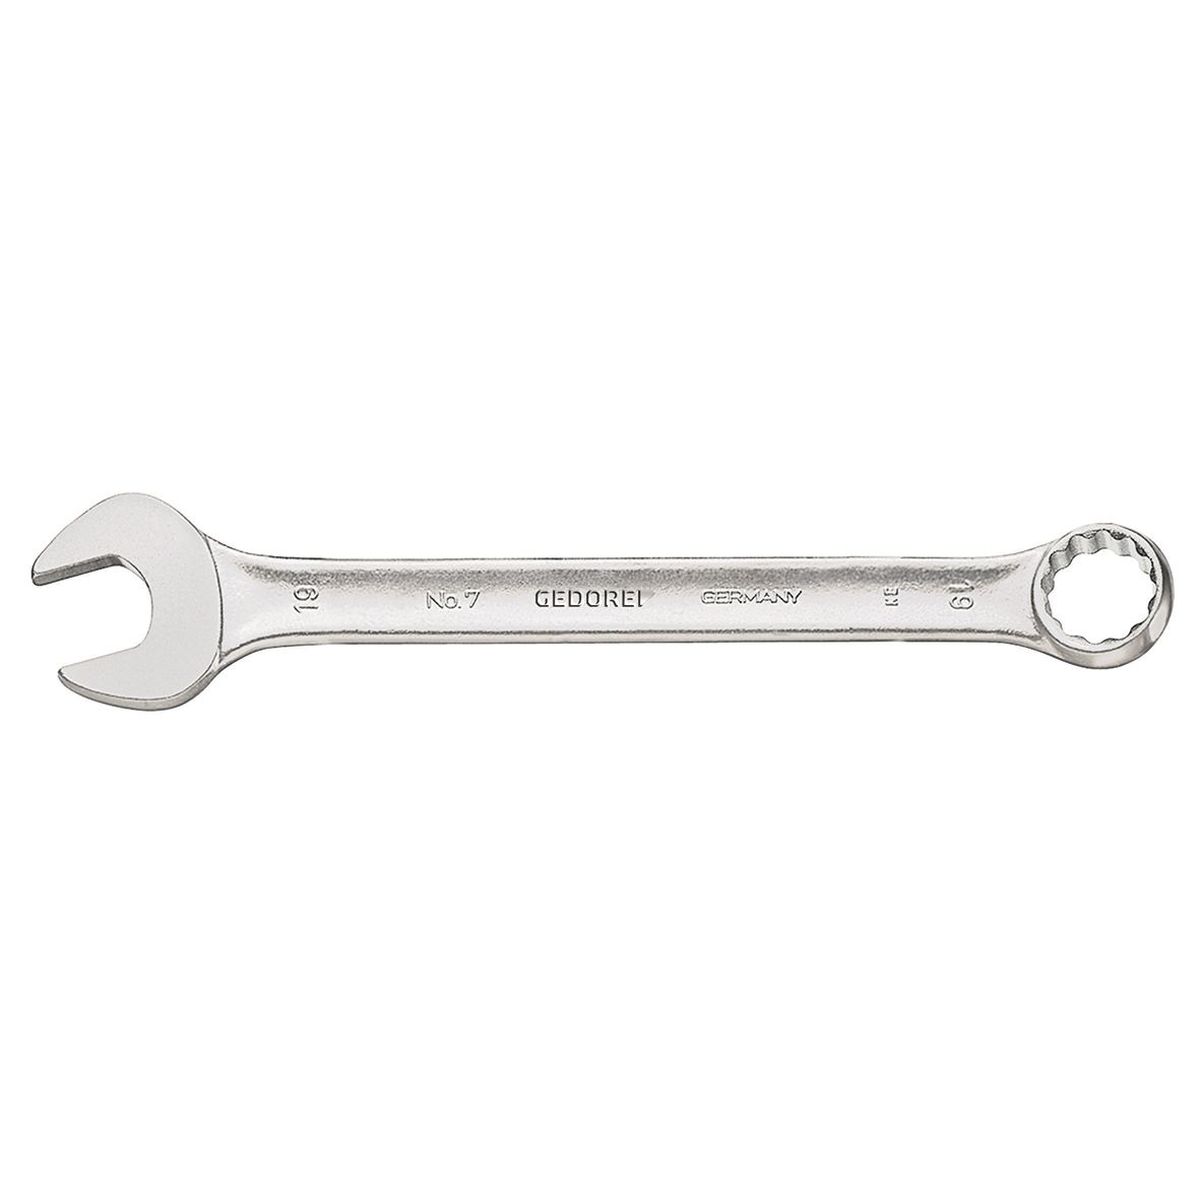 Combination spanner 17mm No.7 17 Gedore